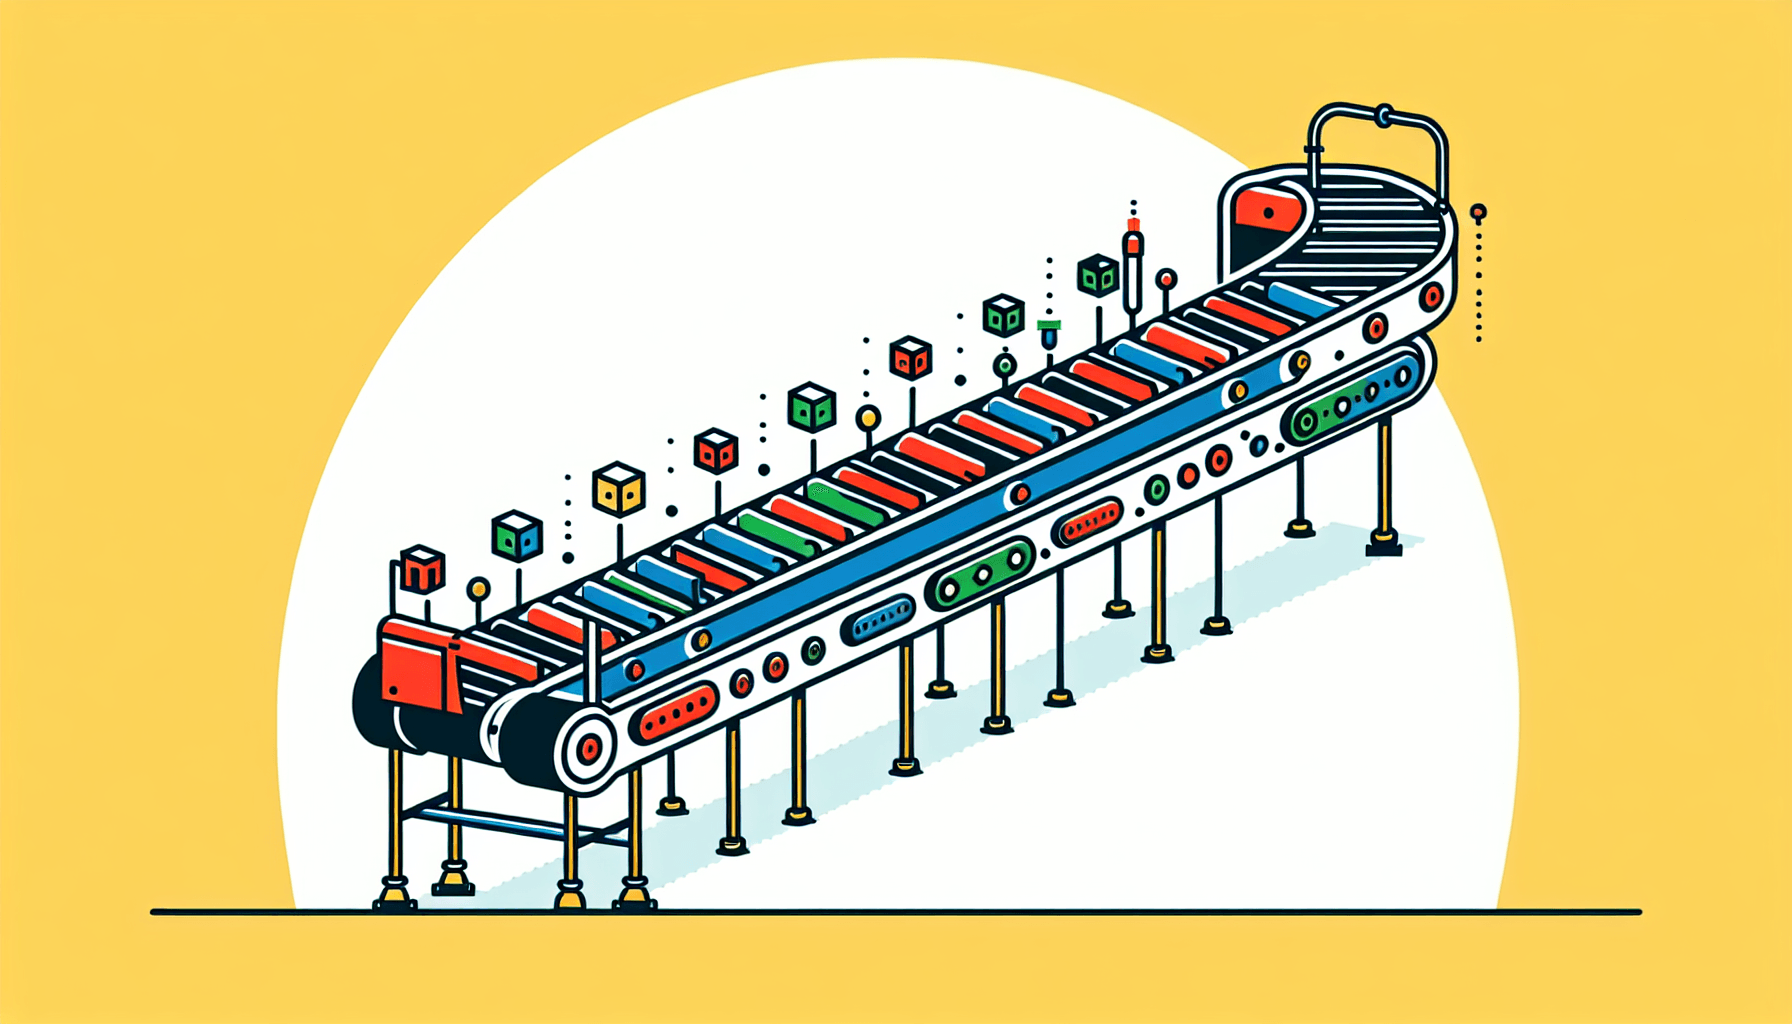 Conveyor belt in flat illustration style and white background, red #f47574, green #88c7a8, yellow #fcc44b, and blue #645bc8 colors.